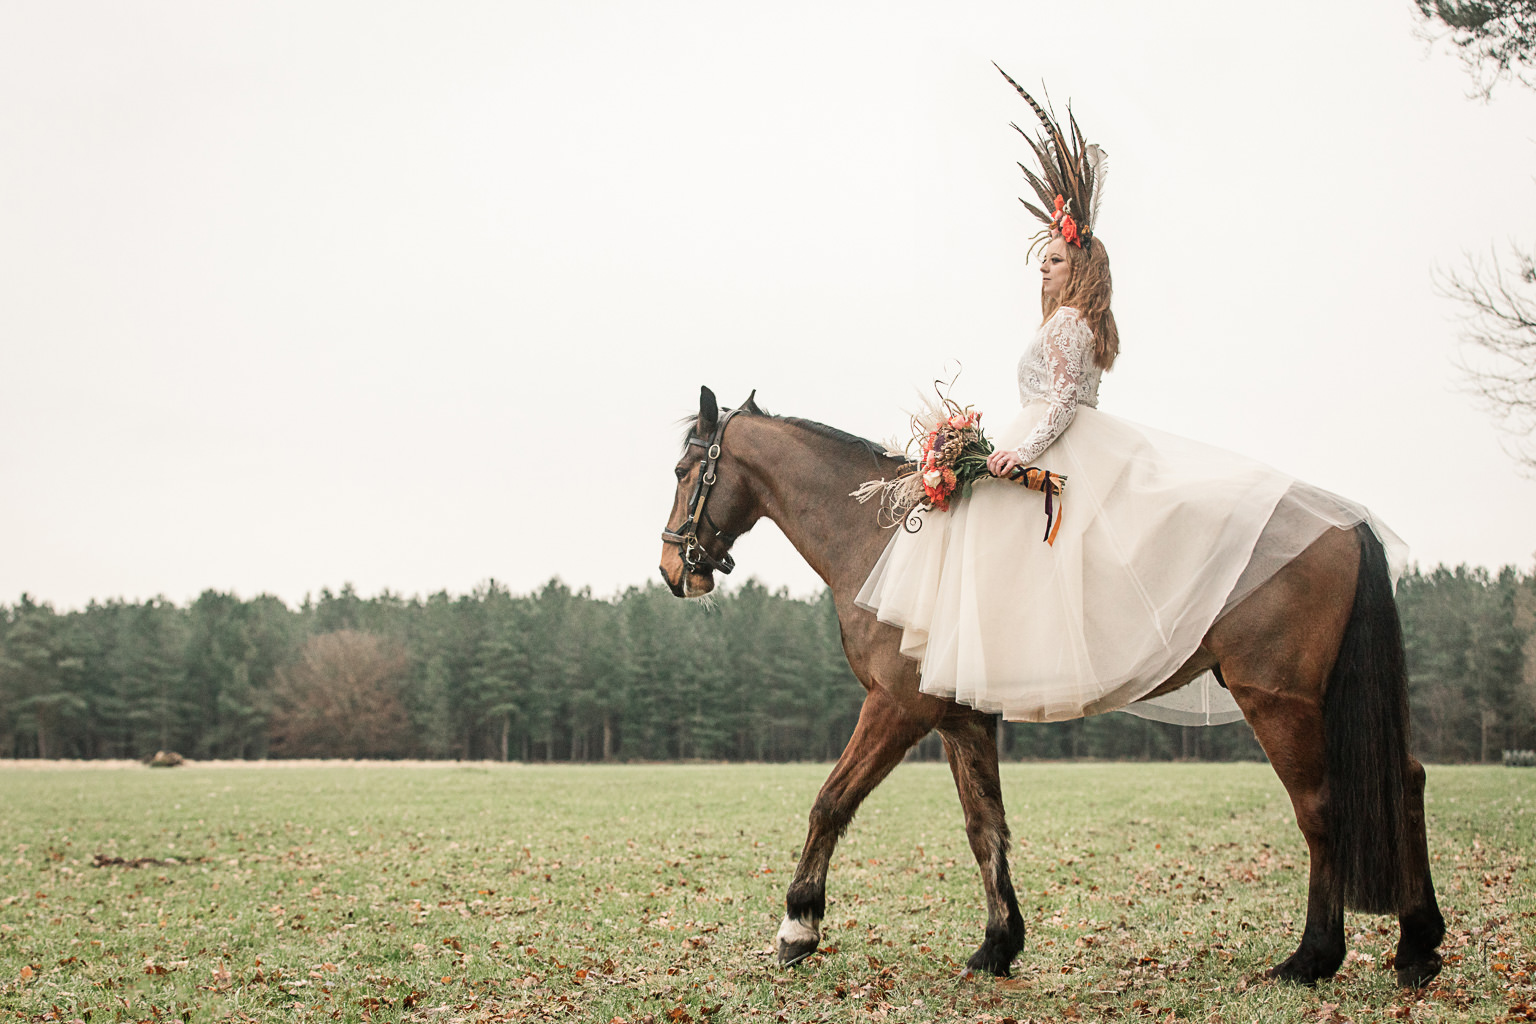 Bold and Beautiful Boudica Shoot - Inspirational and Empowering for the Modern Day Bride